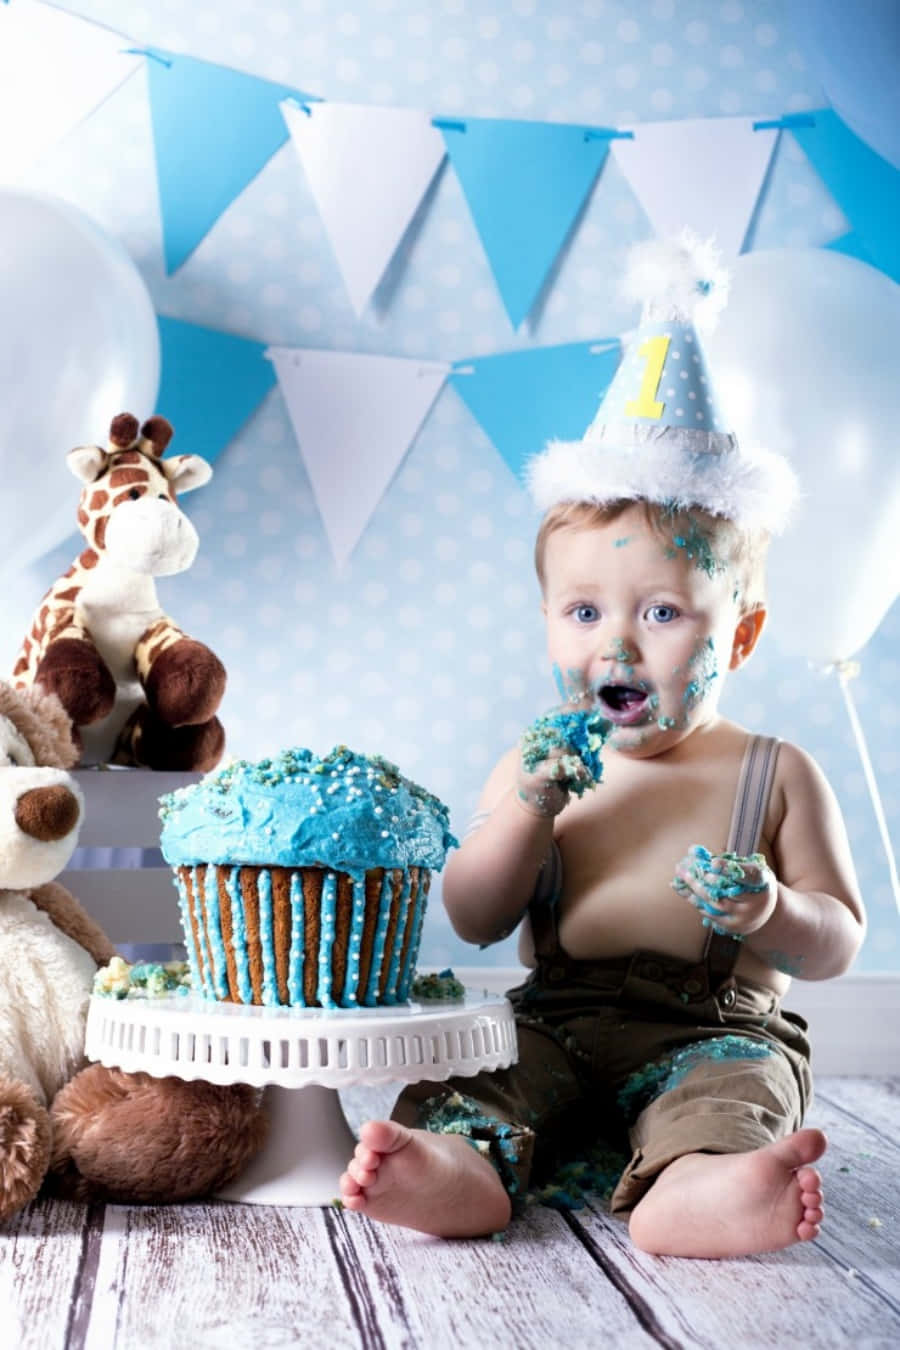 A Baby Boy Is Sitting In Front Of A Cake And Cupcake